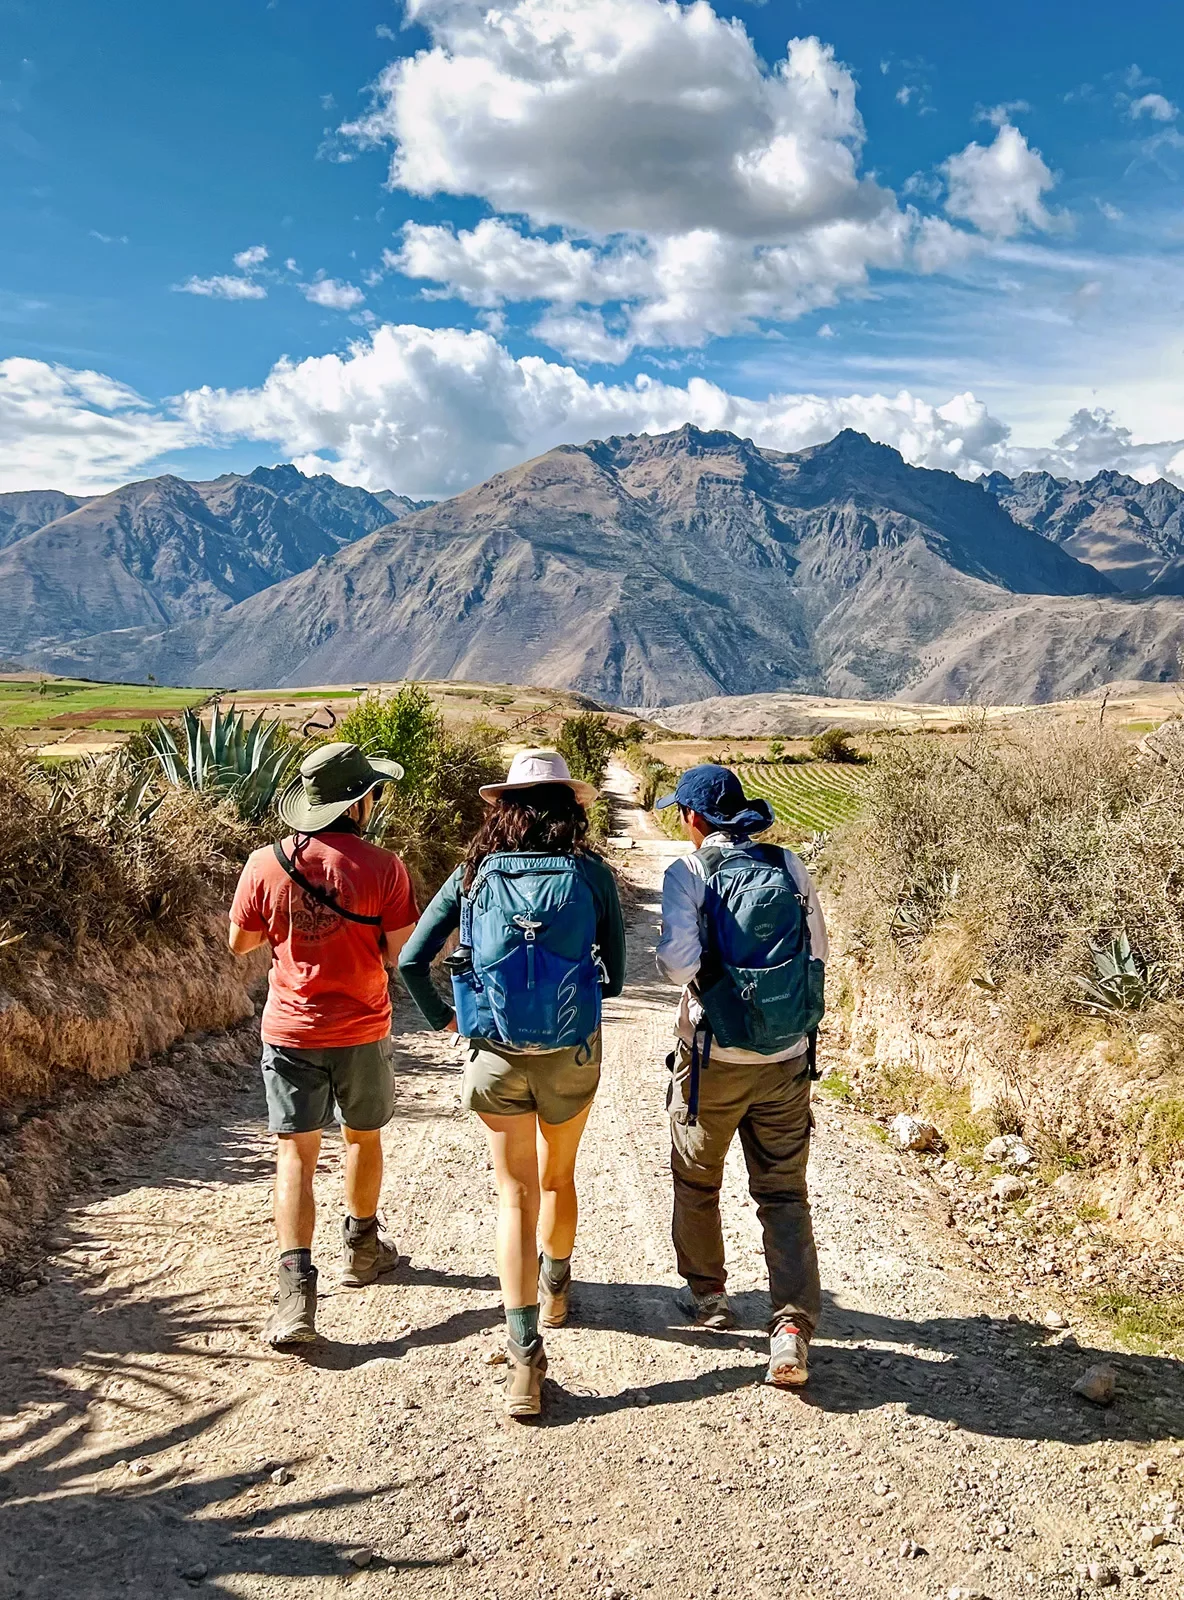 Three guests walking down rocky trail, towards large mountain range.